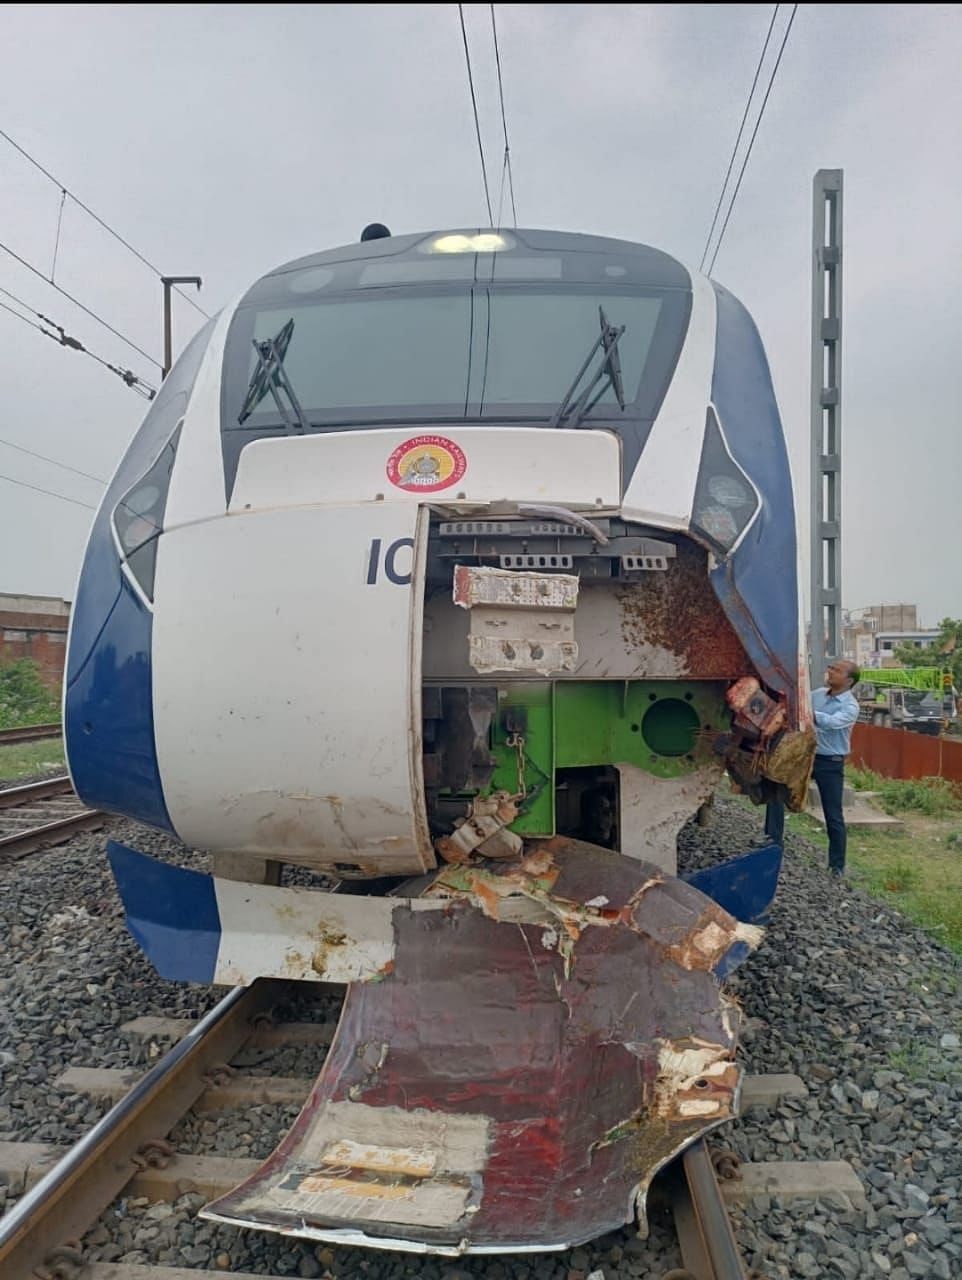 The buffalo was hit and damaged